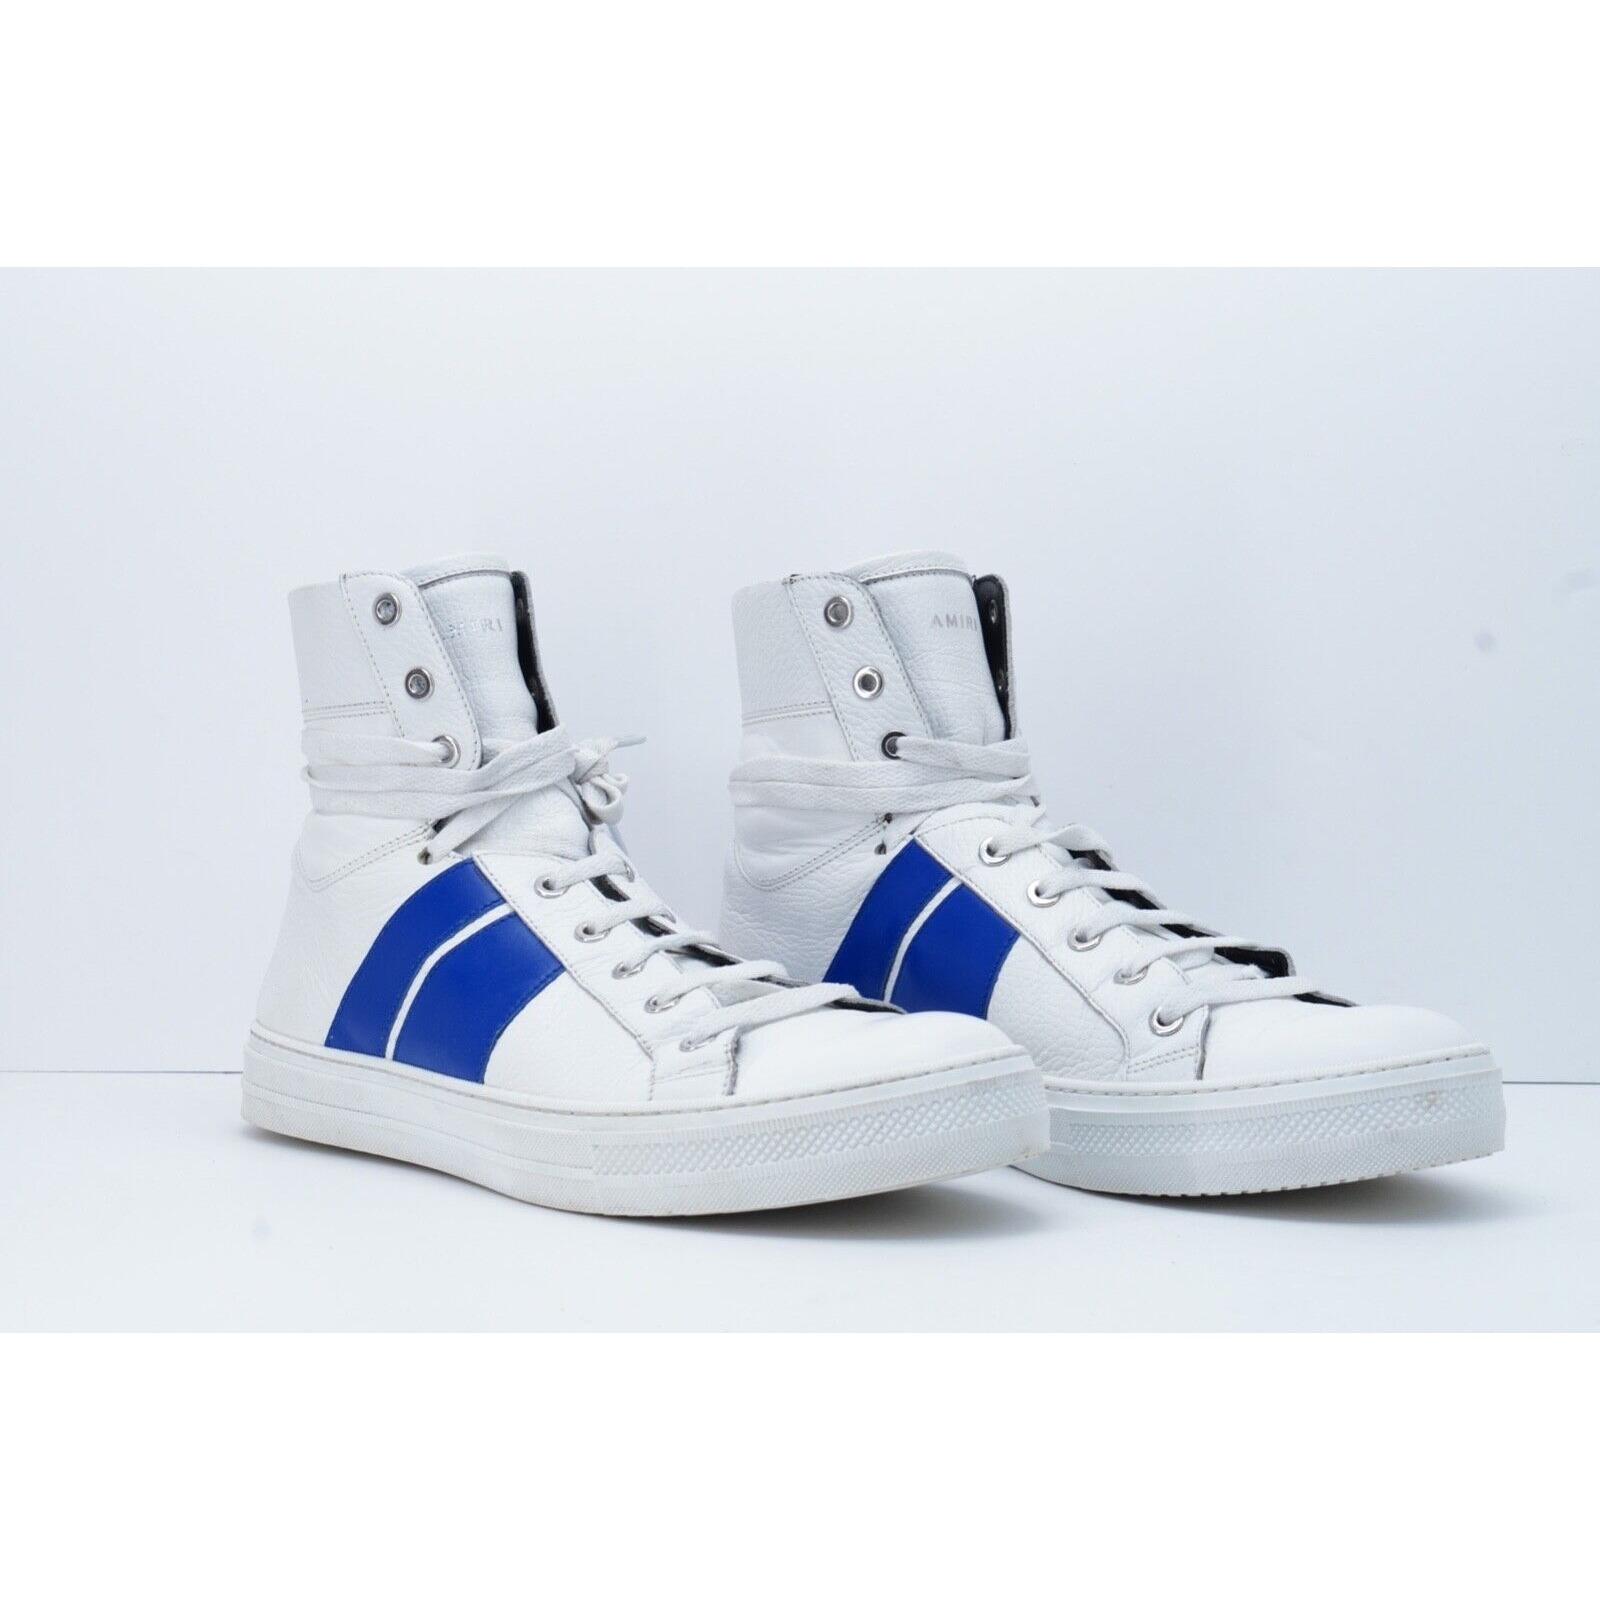 Amiri Sunset Sneakers White Blue High Top Lace Up $595 - Siz - 2